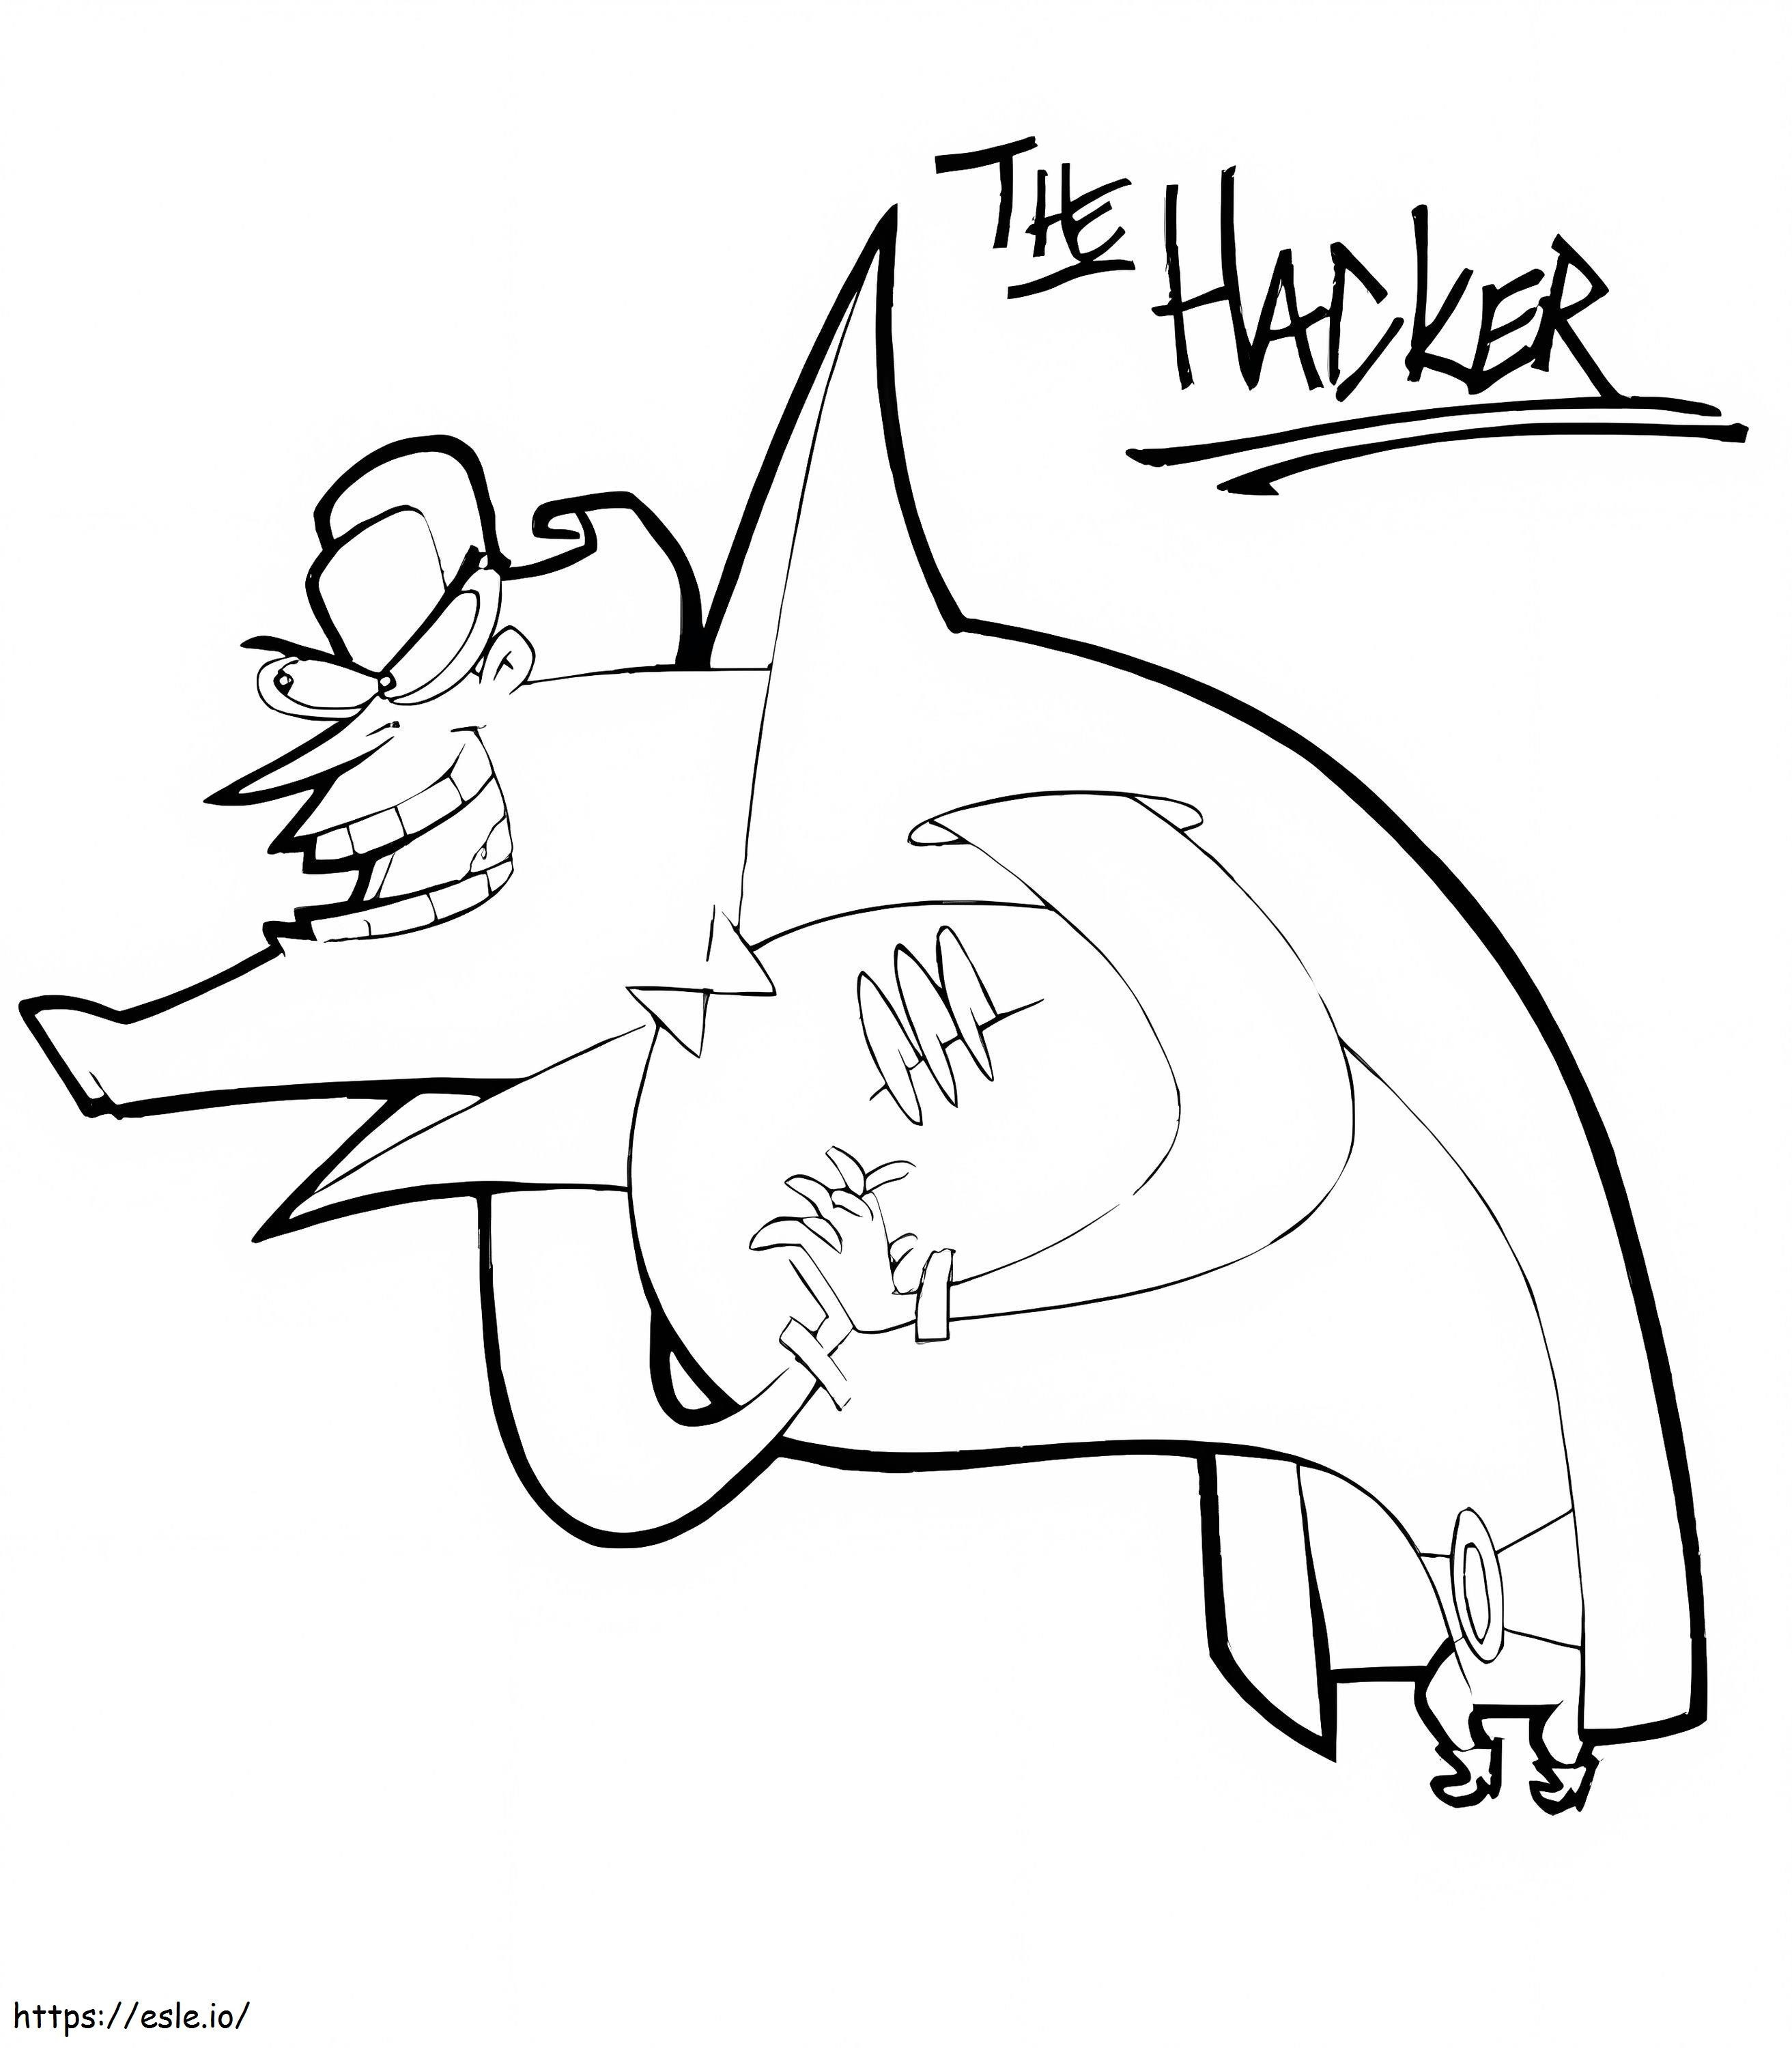 The Hacker'S Cyberchase coloring page